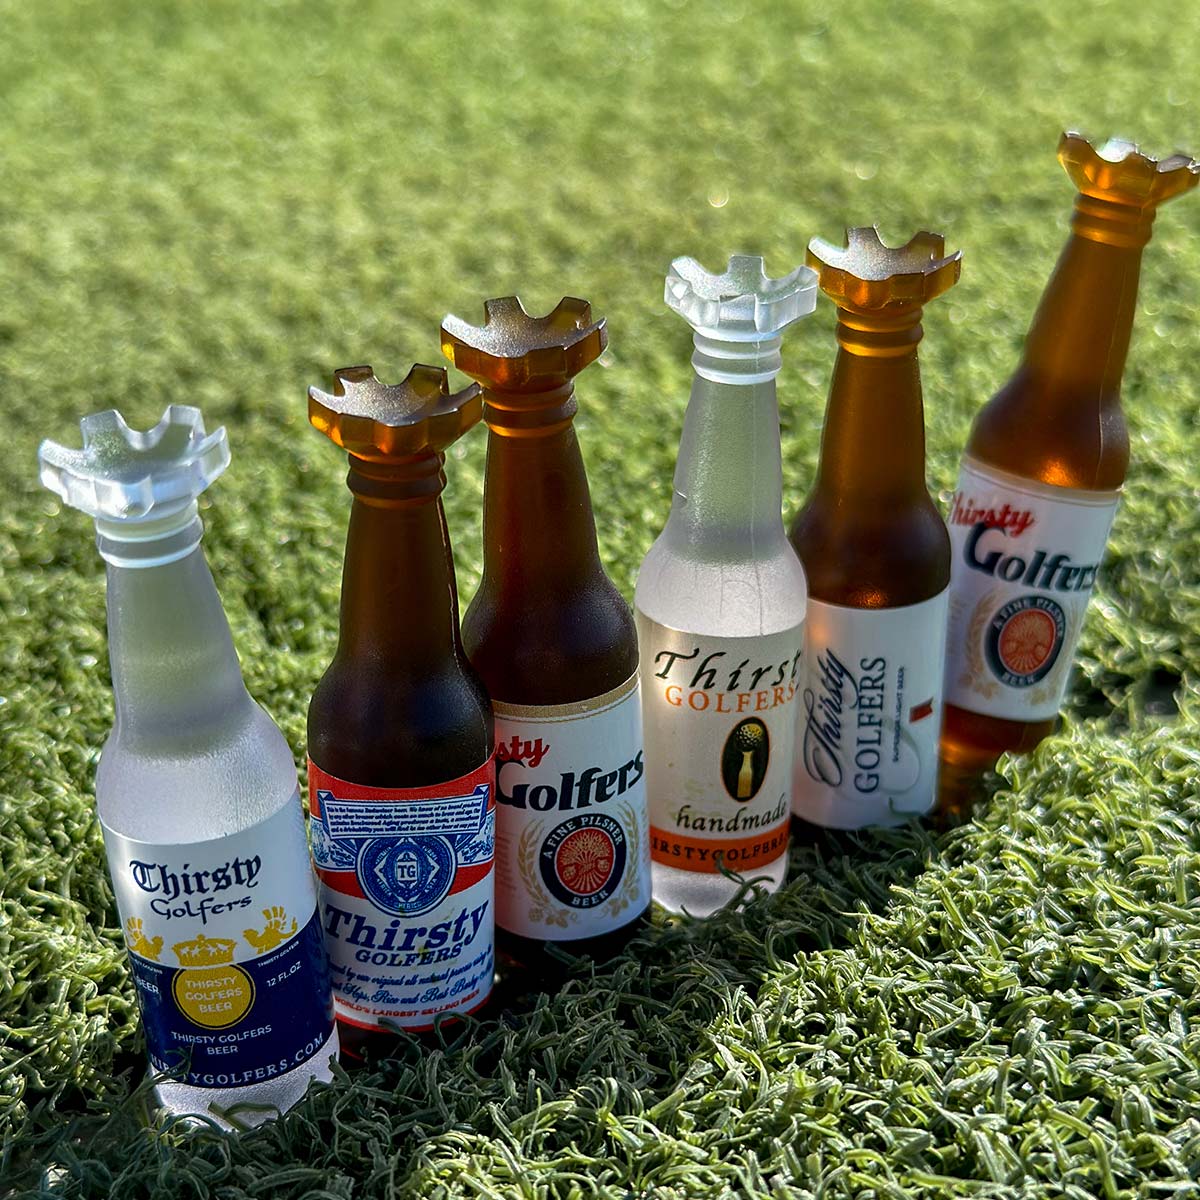 Beer Bottle Golf Tee Bundles Perfect for Bachelor Parties, Golf Trips, Golf  Functions, Fundraisers -  Österreich